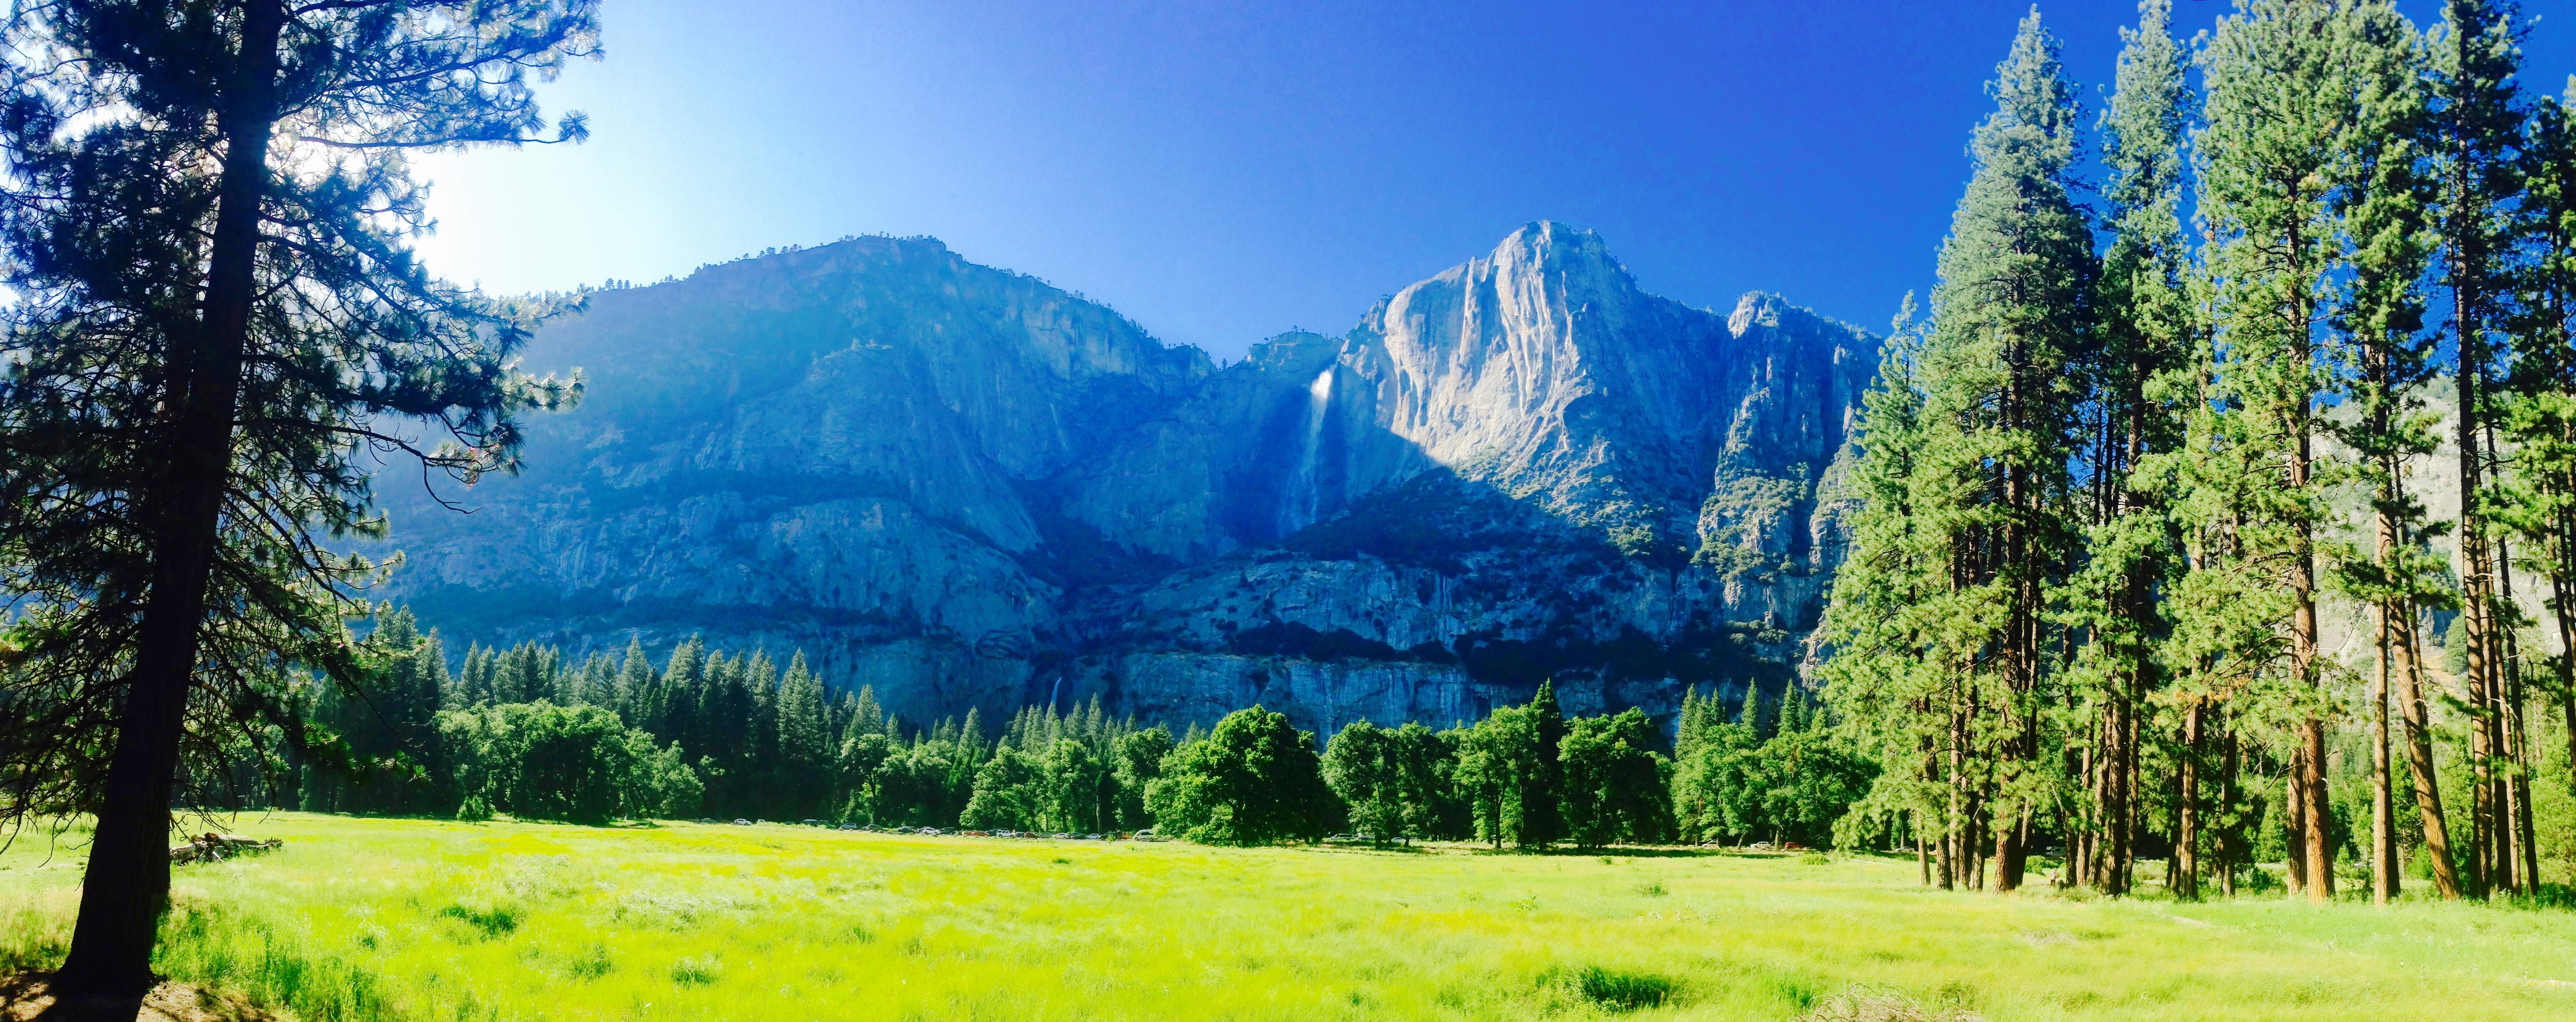 Yosemite National Park With Angel Falls In The Background Taken